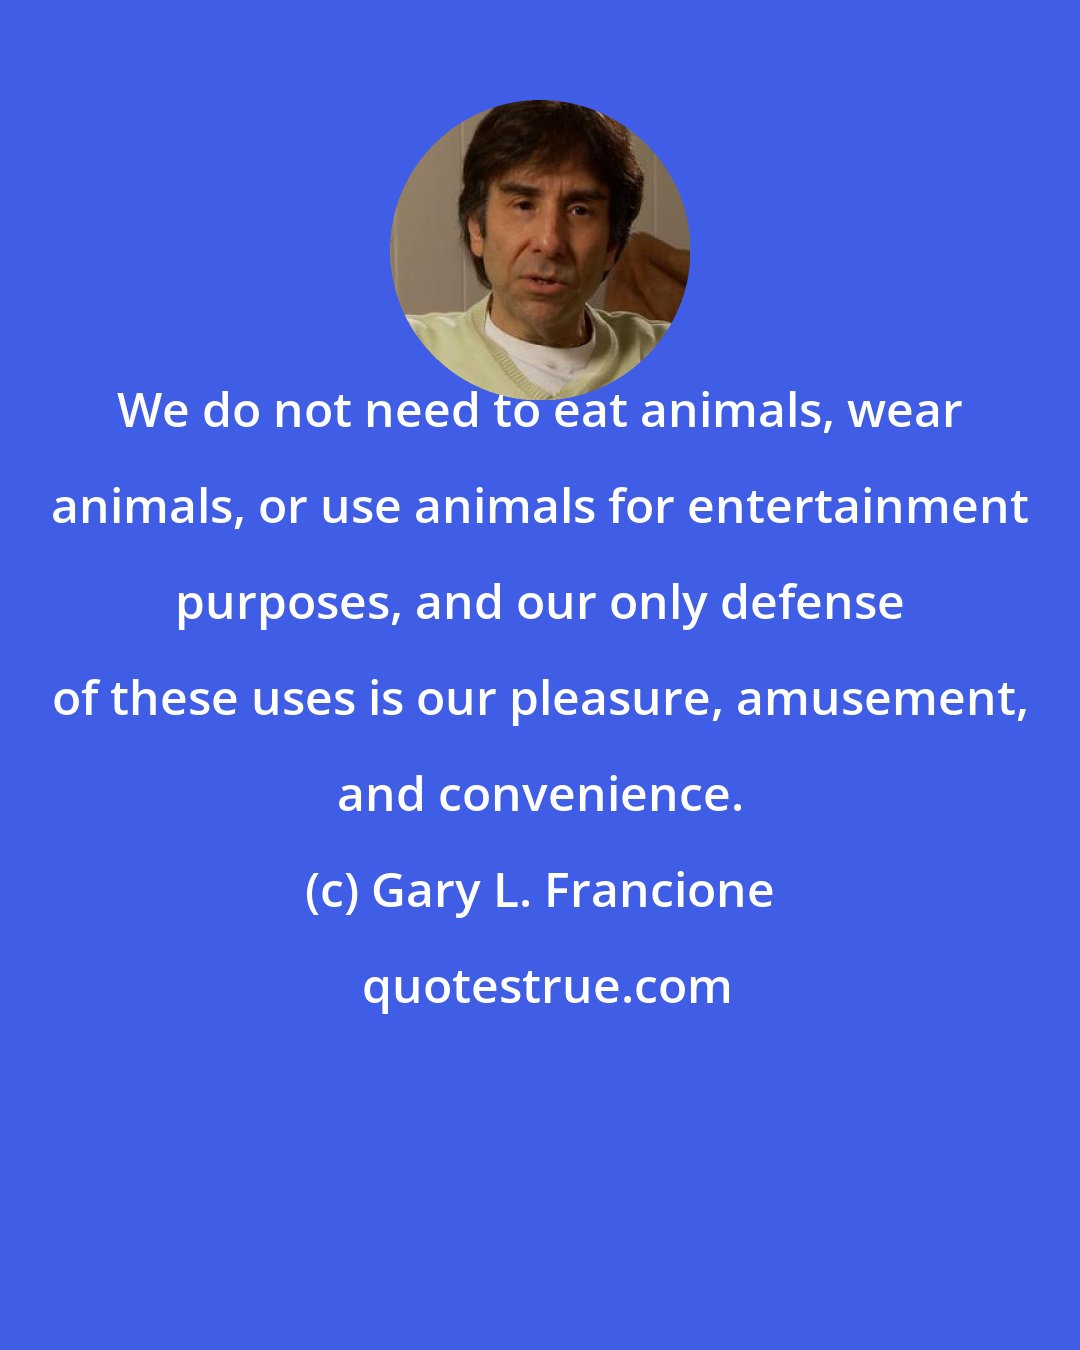 Gary L. Francione: We do not need to eat animals, wear animals, or use animals for entertainment purposes, and our only defense of these uses is our pleasure, amusement, and convenience.